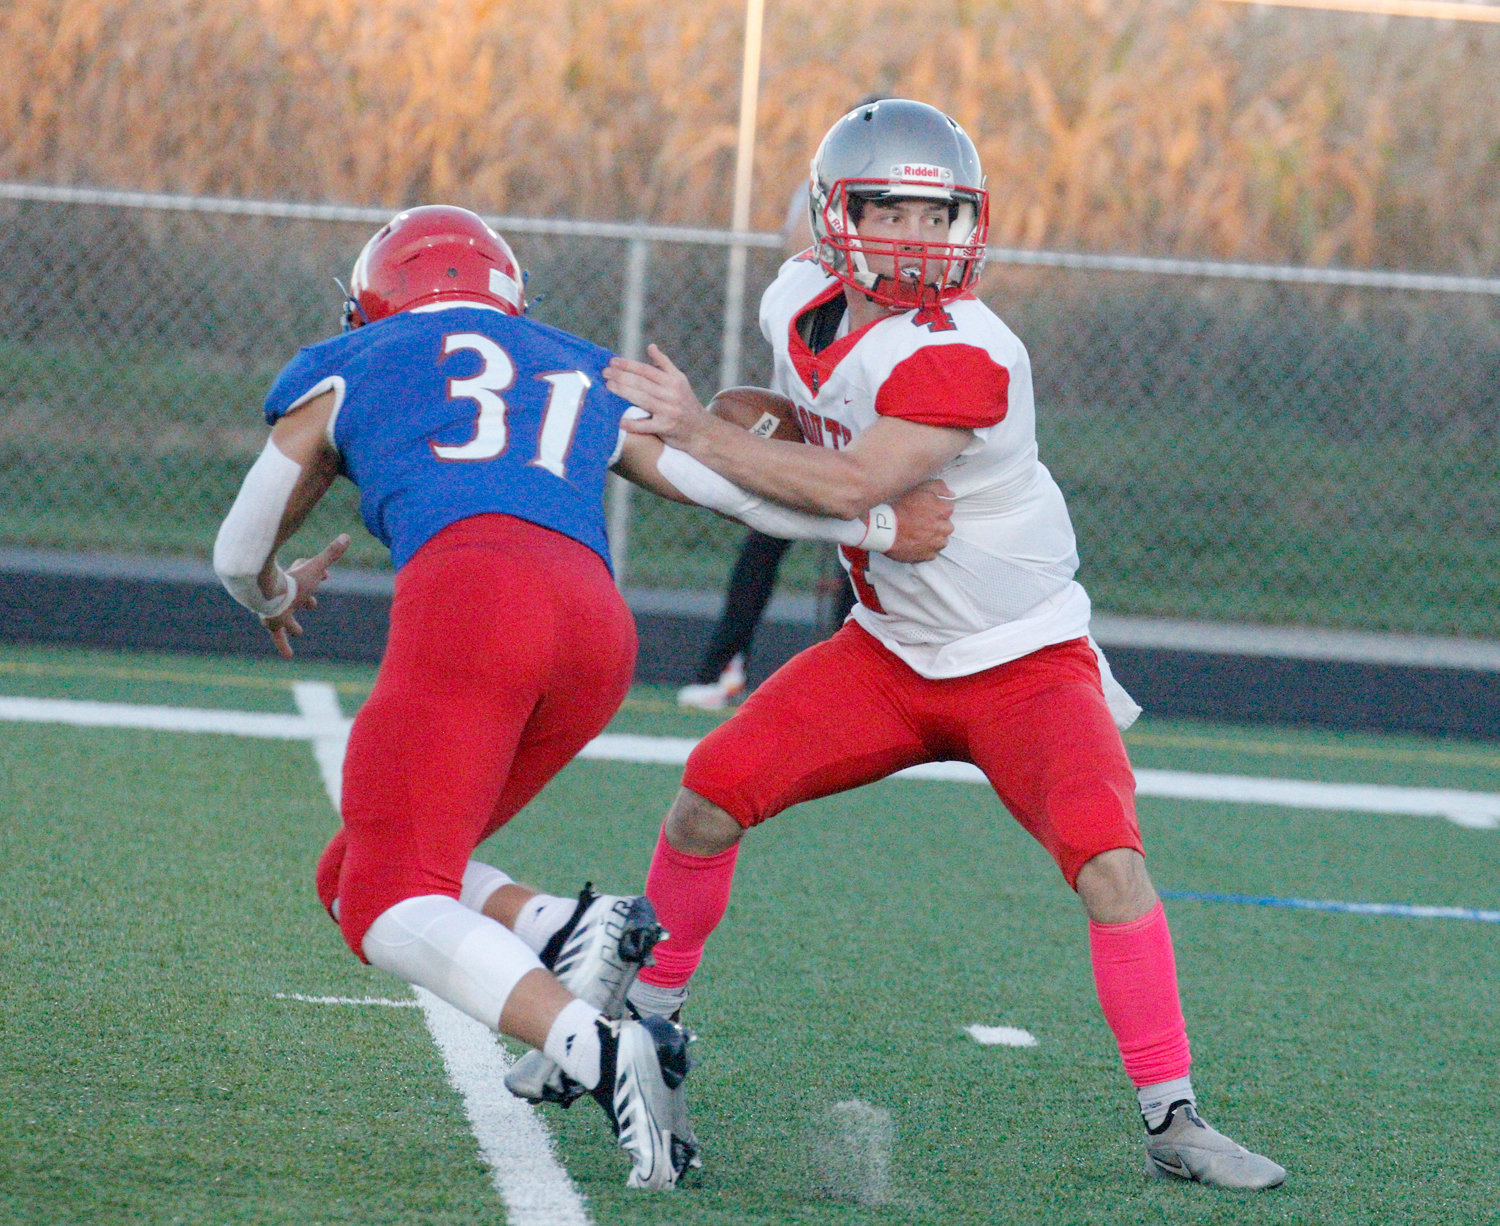 Southmont quarterback Nick Scott evades a pass rusher during the Mounties 38-7 loss against Western Boone.